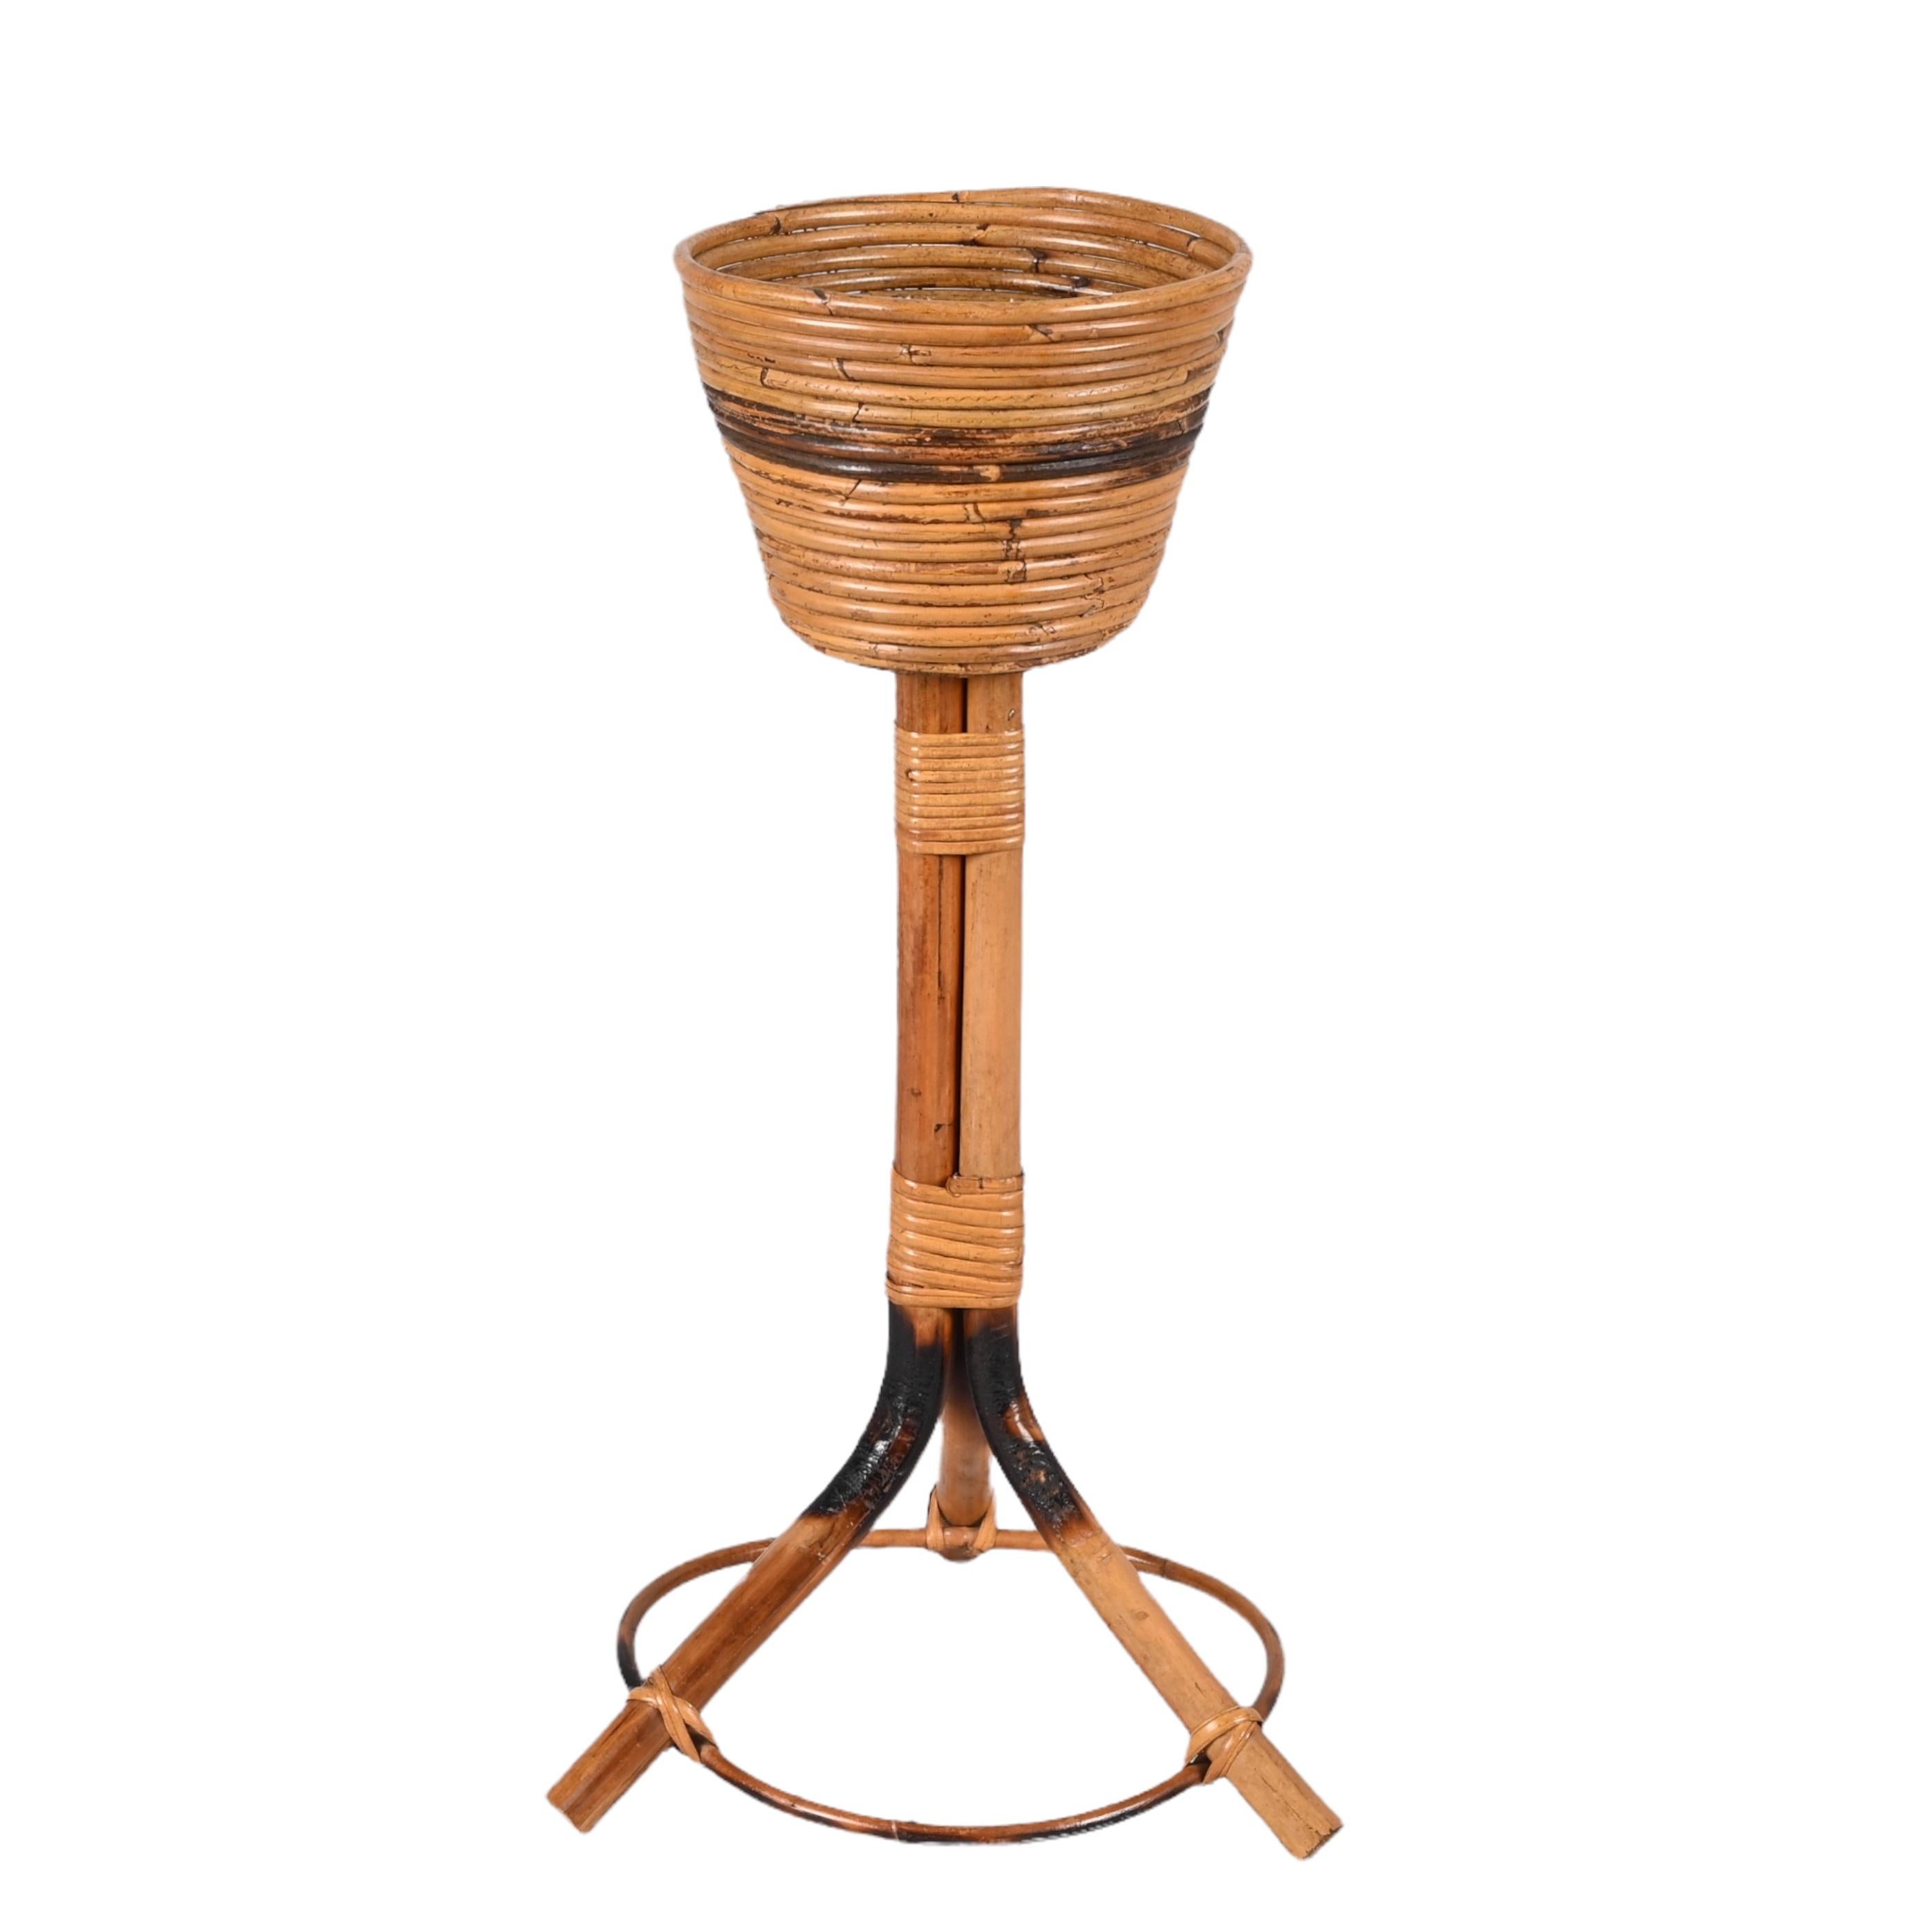 Amazing mid-century curved bamboo and wicker flower or plant stand. This fantastic object was designed in Italy during the 1960s.

This magnificent piece has a solid bamboo frame with a tripod base, while the fantastic plant holder is made of